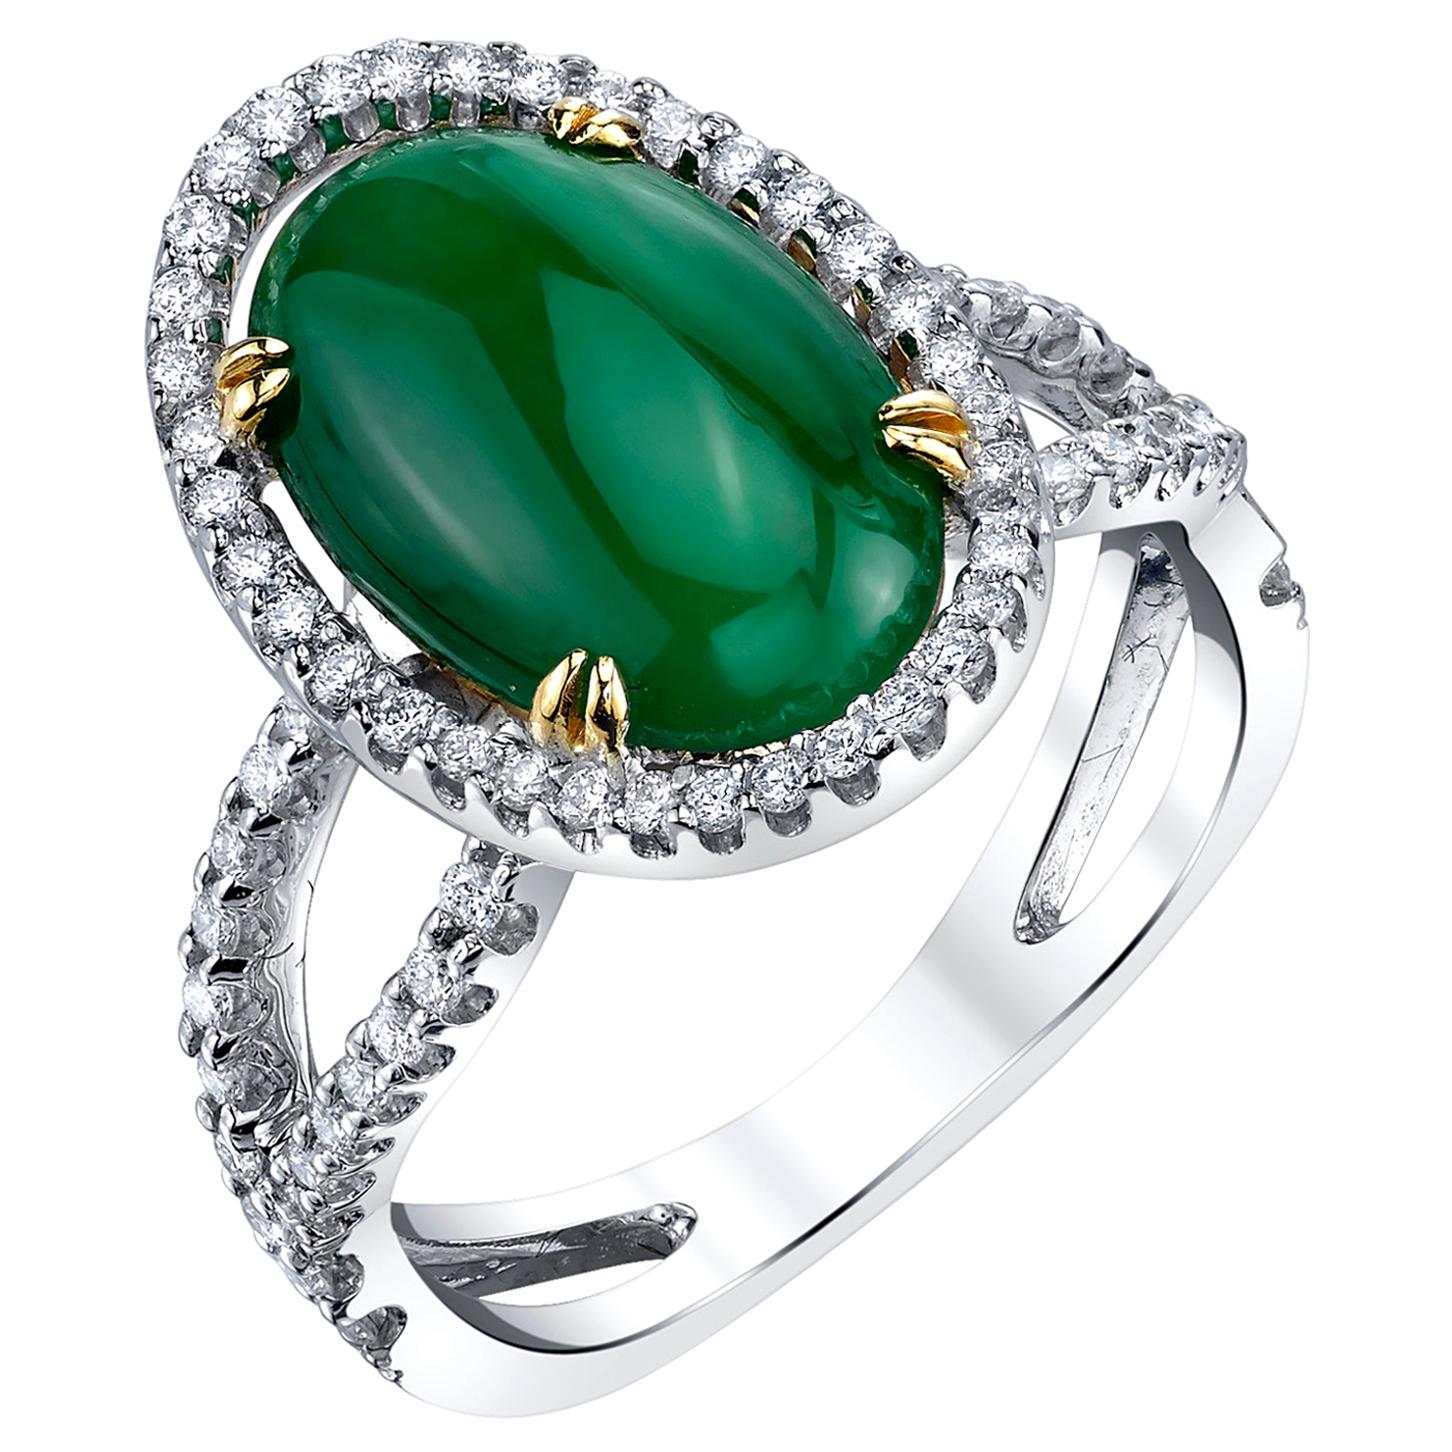 GIA Certified 3.32 Carat Imperial Jadeite and Diamond Ring in 18k White Gold For Sale